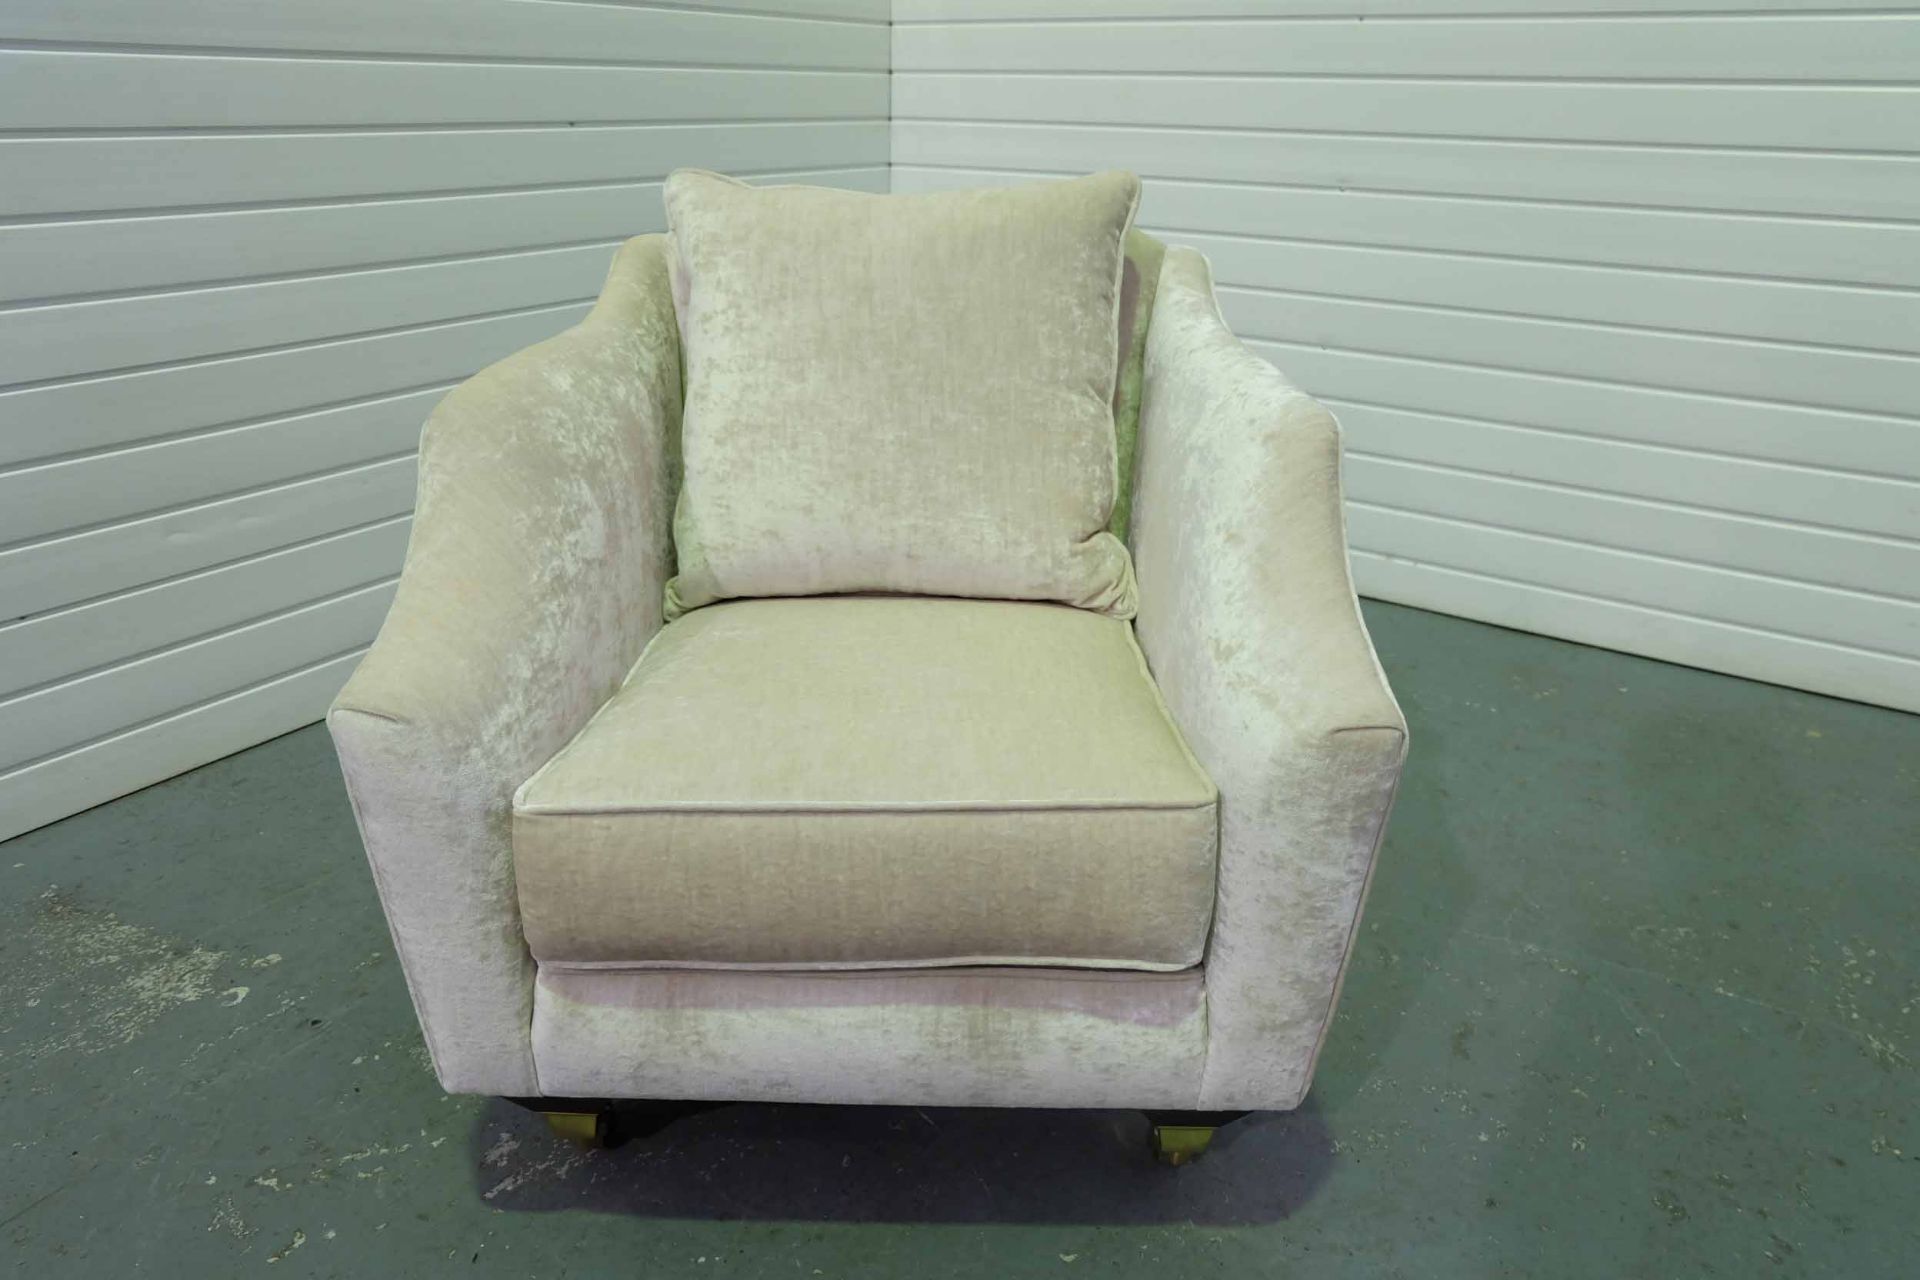 Steed Upholstery 'Hockley' Range Fully Handmade Chair. With Castor Wheels to the Front of the Chair.